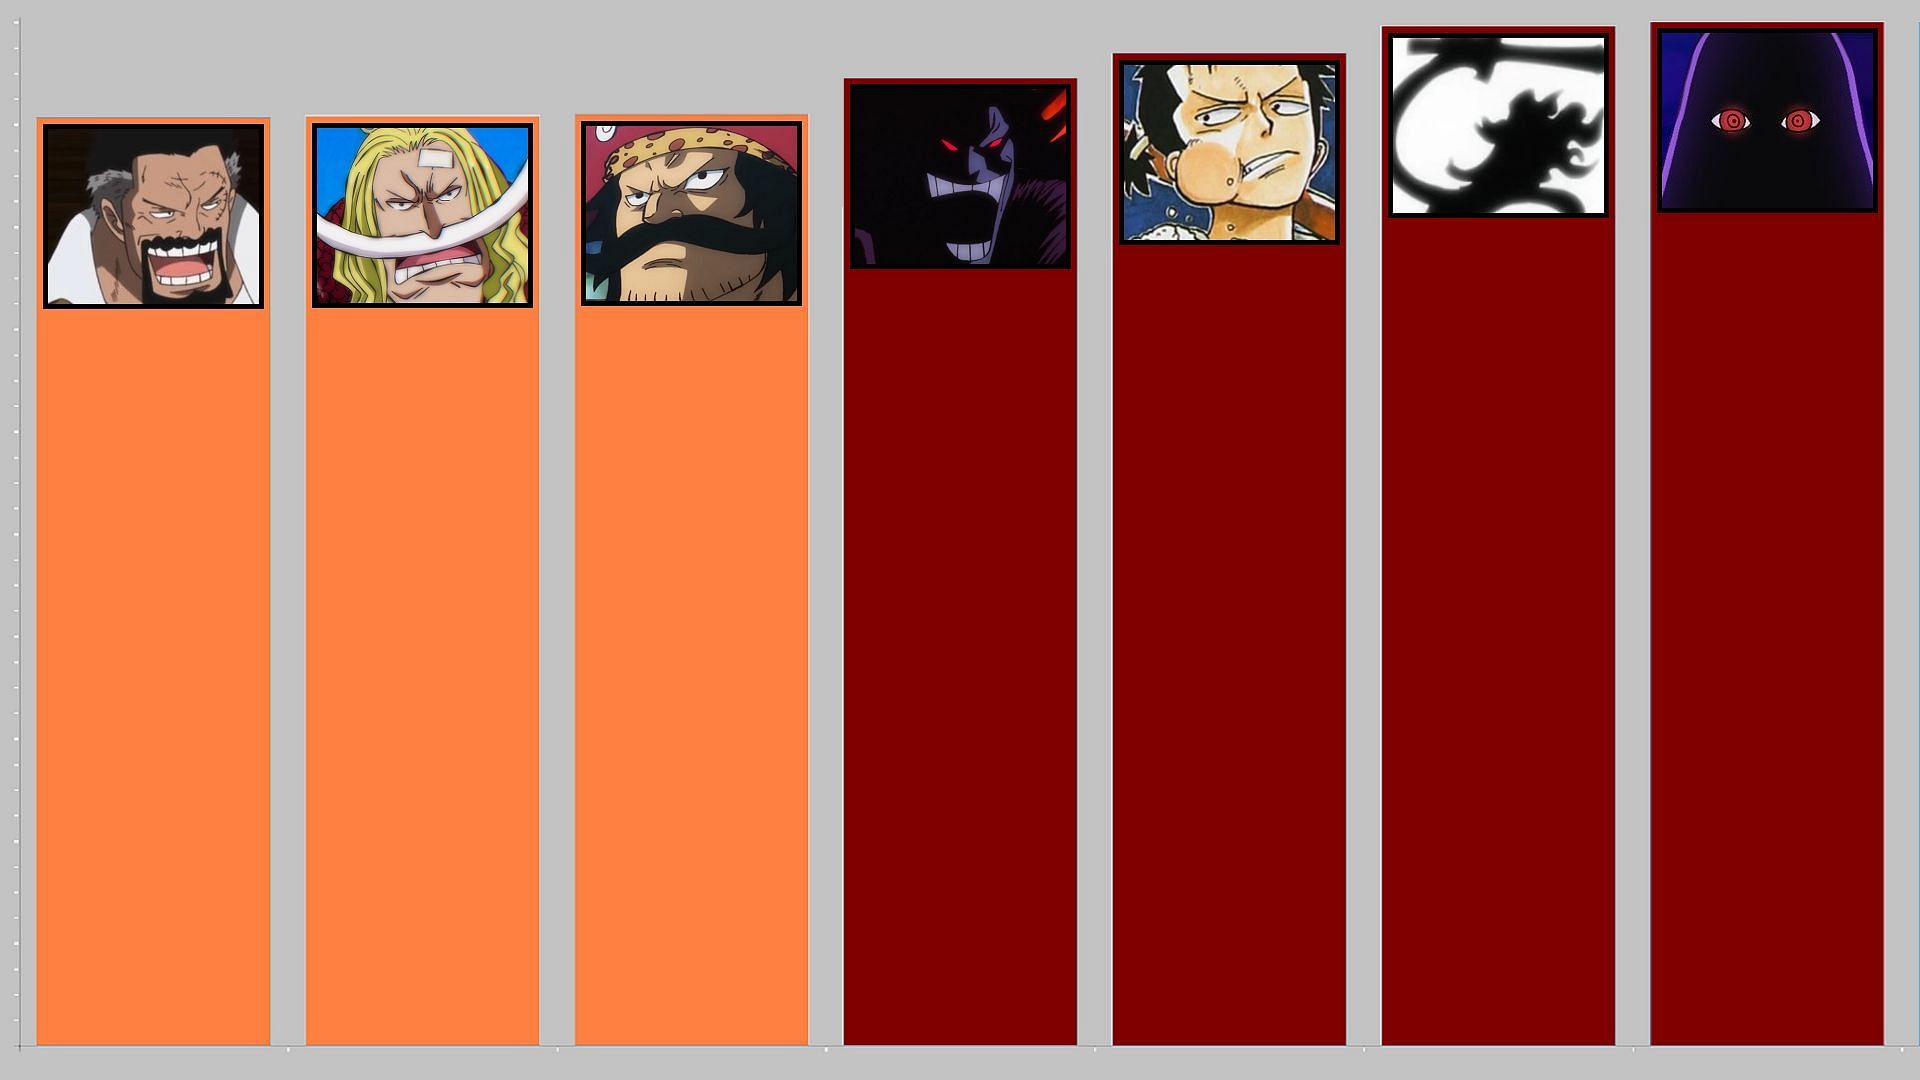 Ranking positions from 7th to 1st (Image via Toei Animation, One Piece)